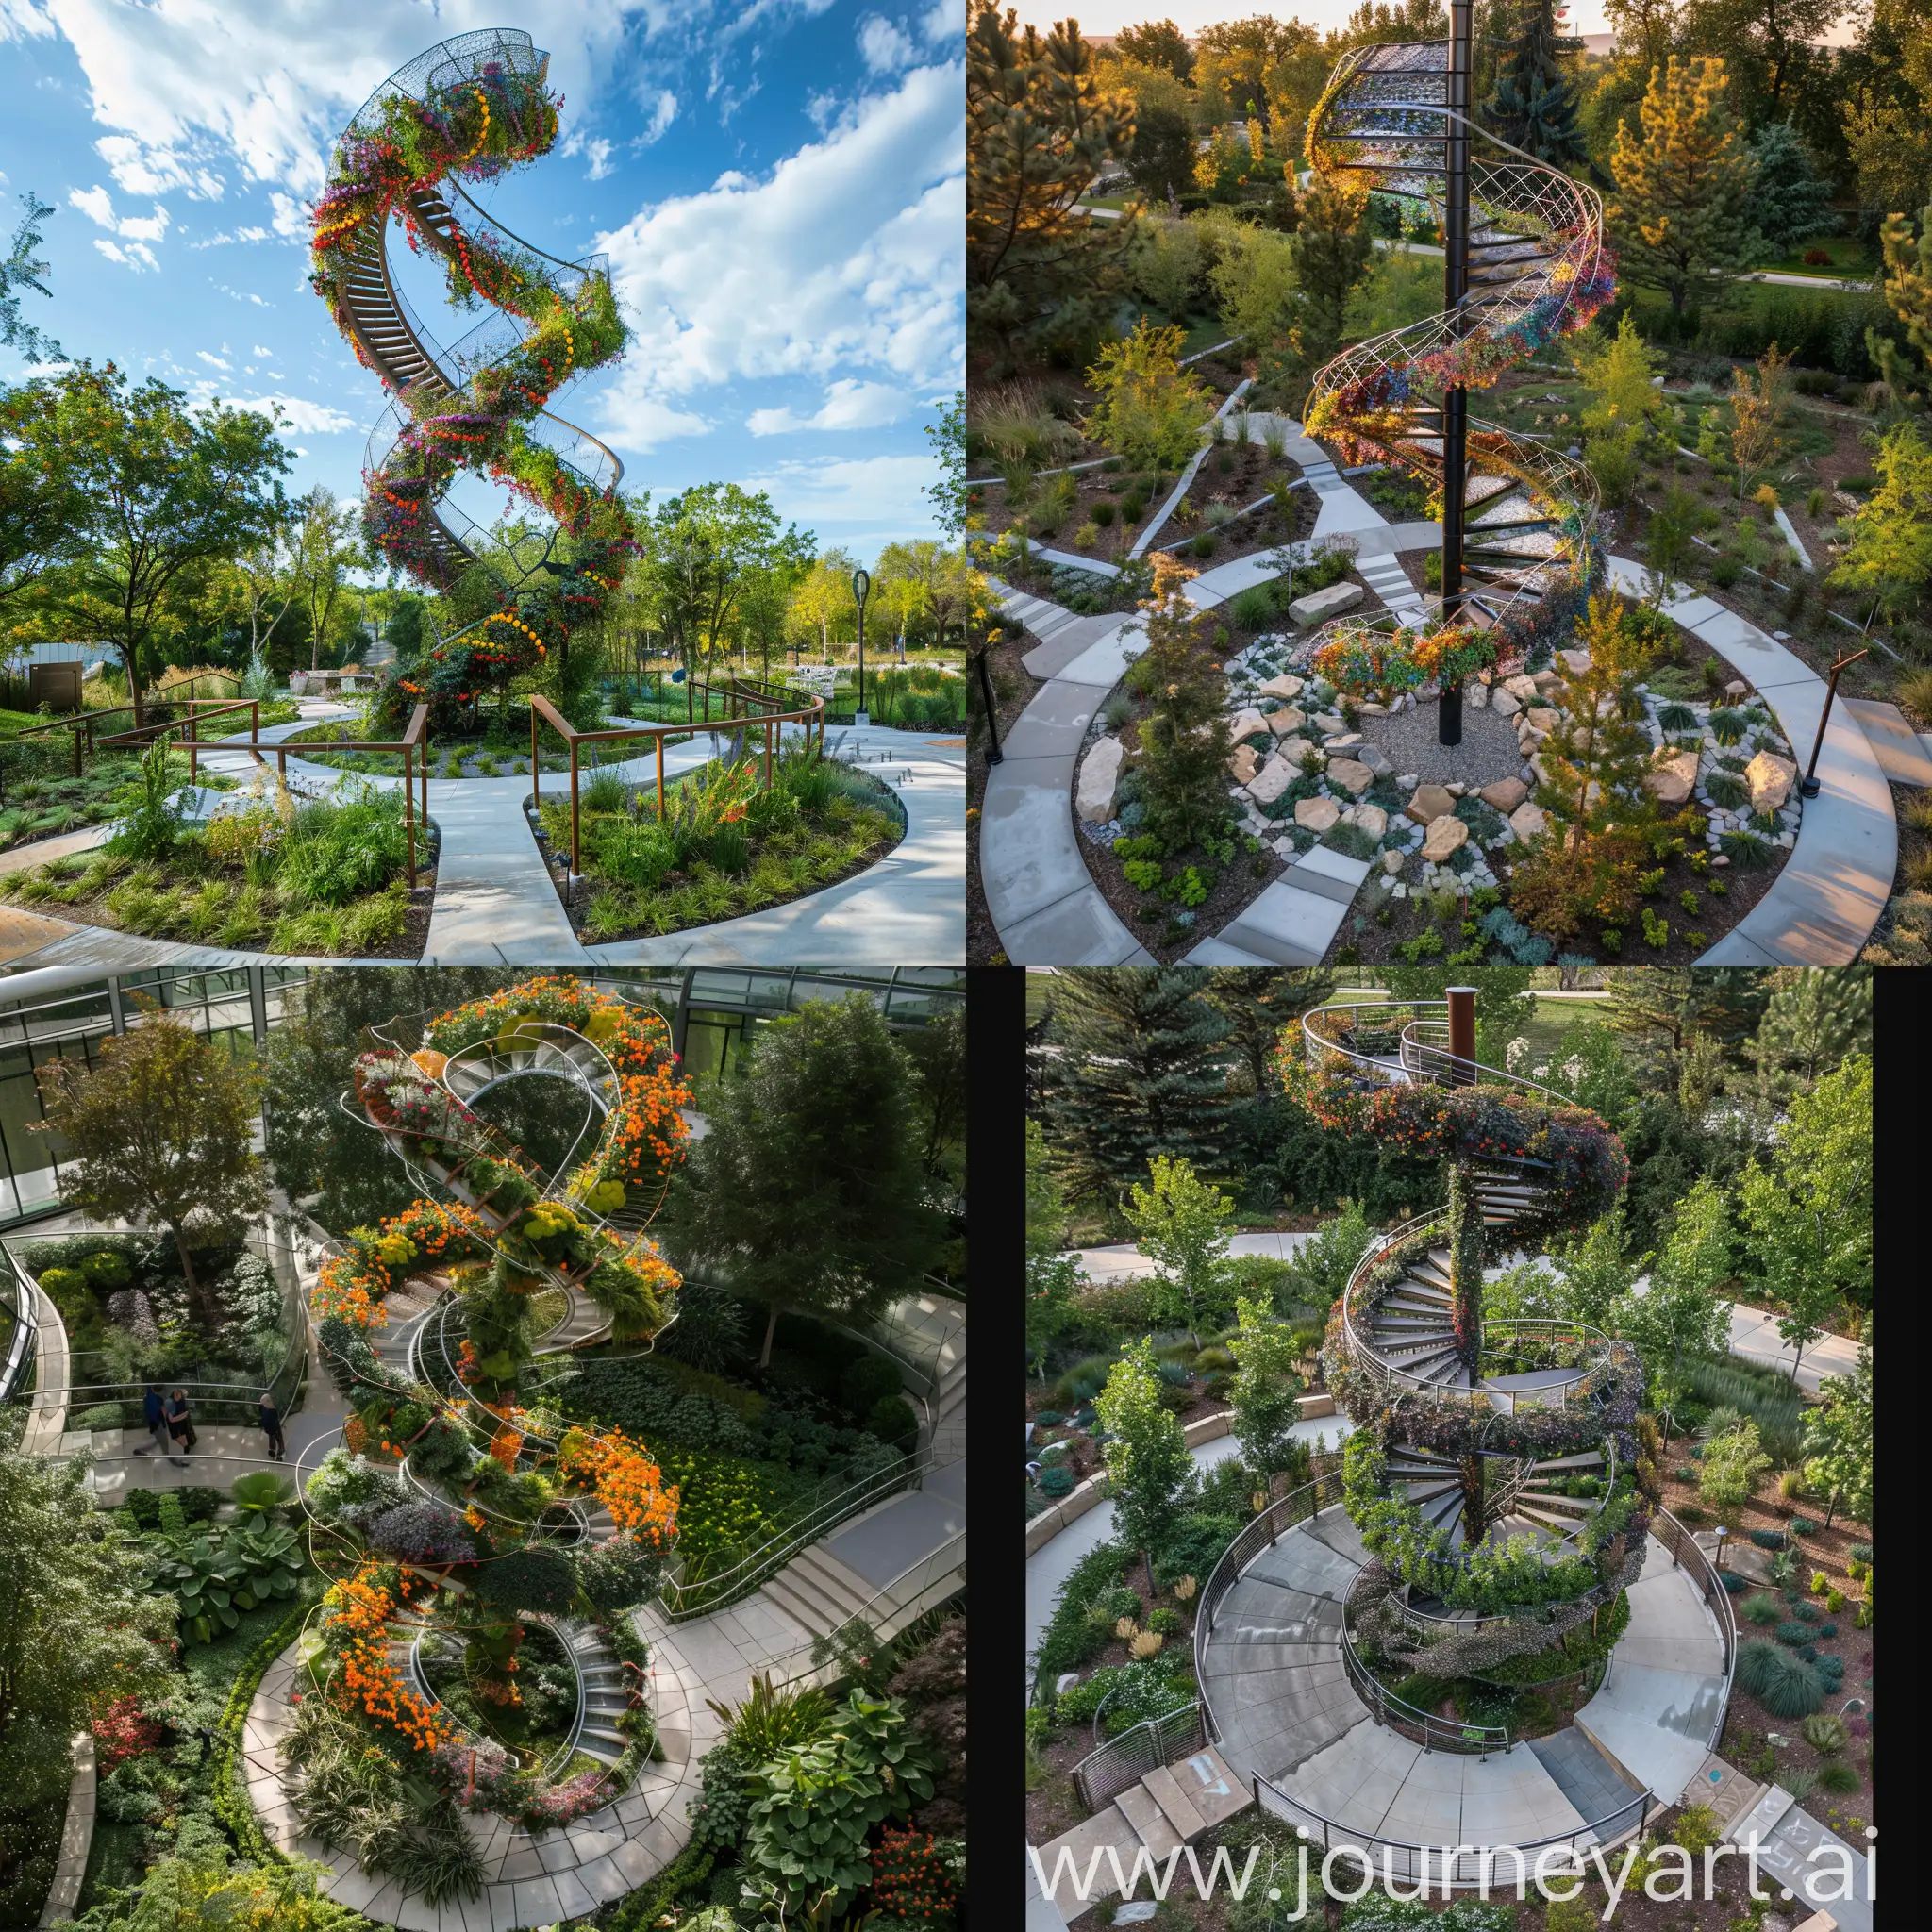 A large DNA helix sculpture made of intertwined plants, metal, and glass, surrounded by landscaped gardens. Pathways lead to various interactive art pieces that represent genetic concepts. A striking DNA sculpture surrounded by landscaped gardens, with pathways leading to various interactive art pieces.